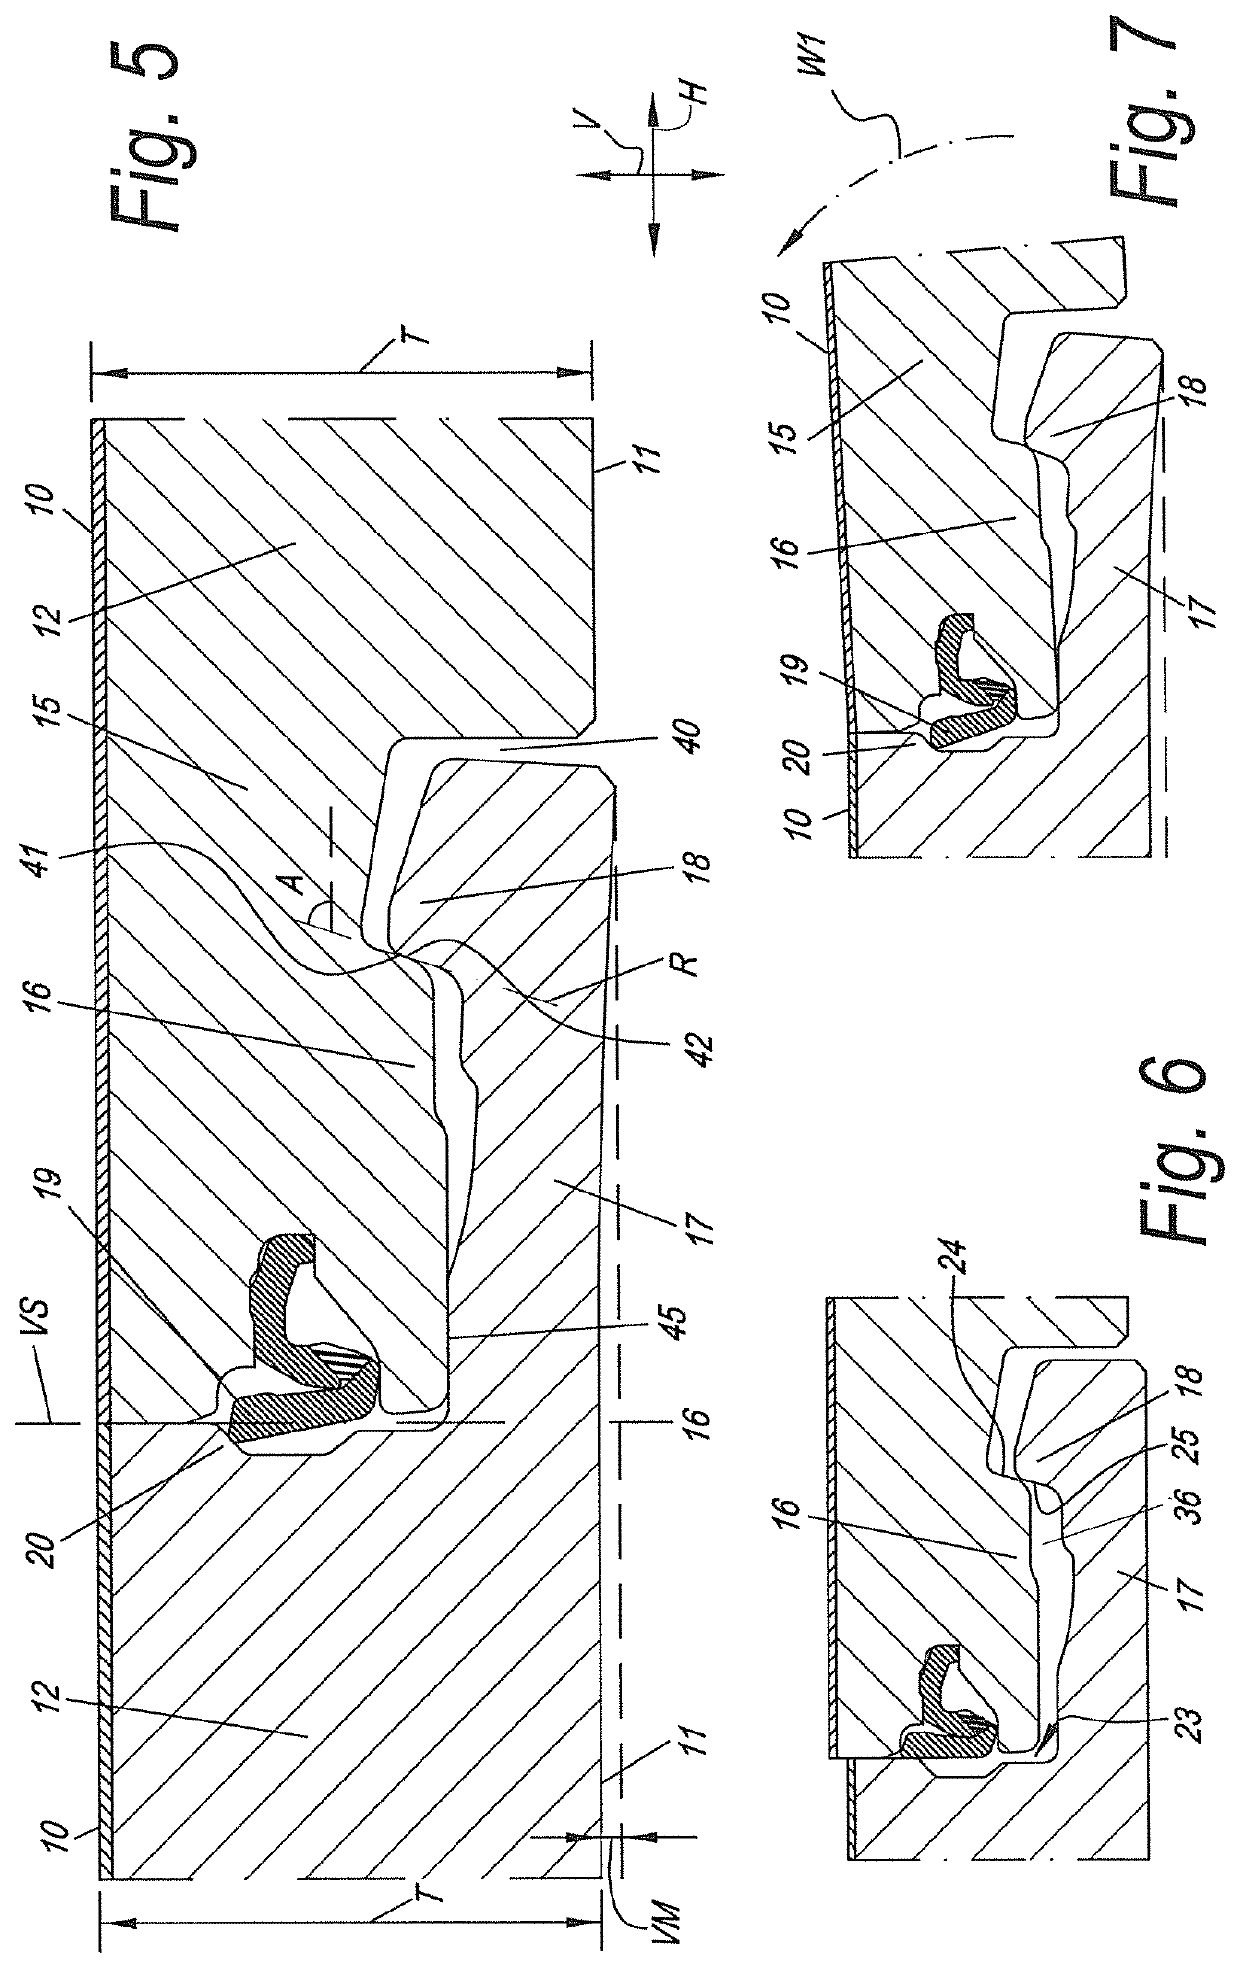 Set of floor panels for forming a floor covering